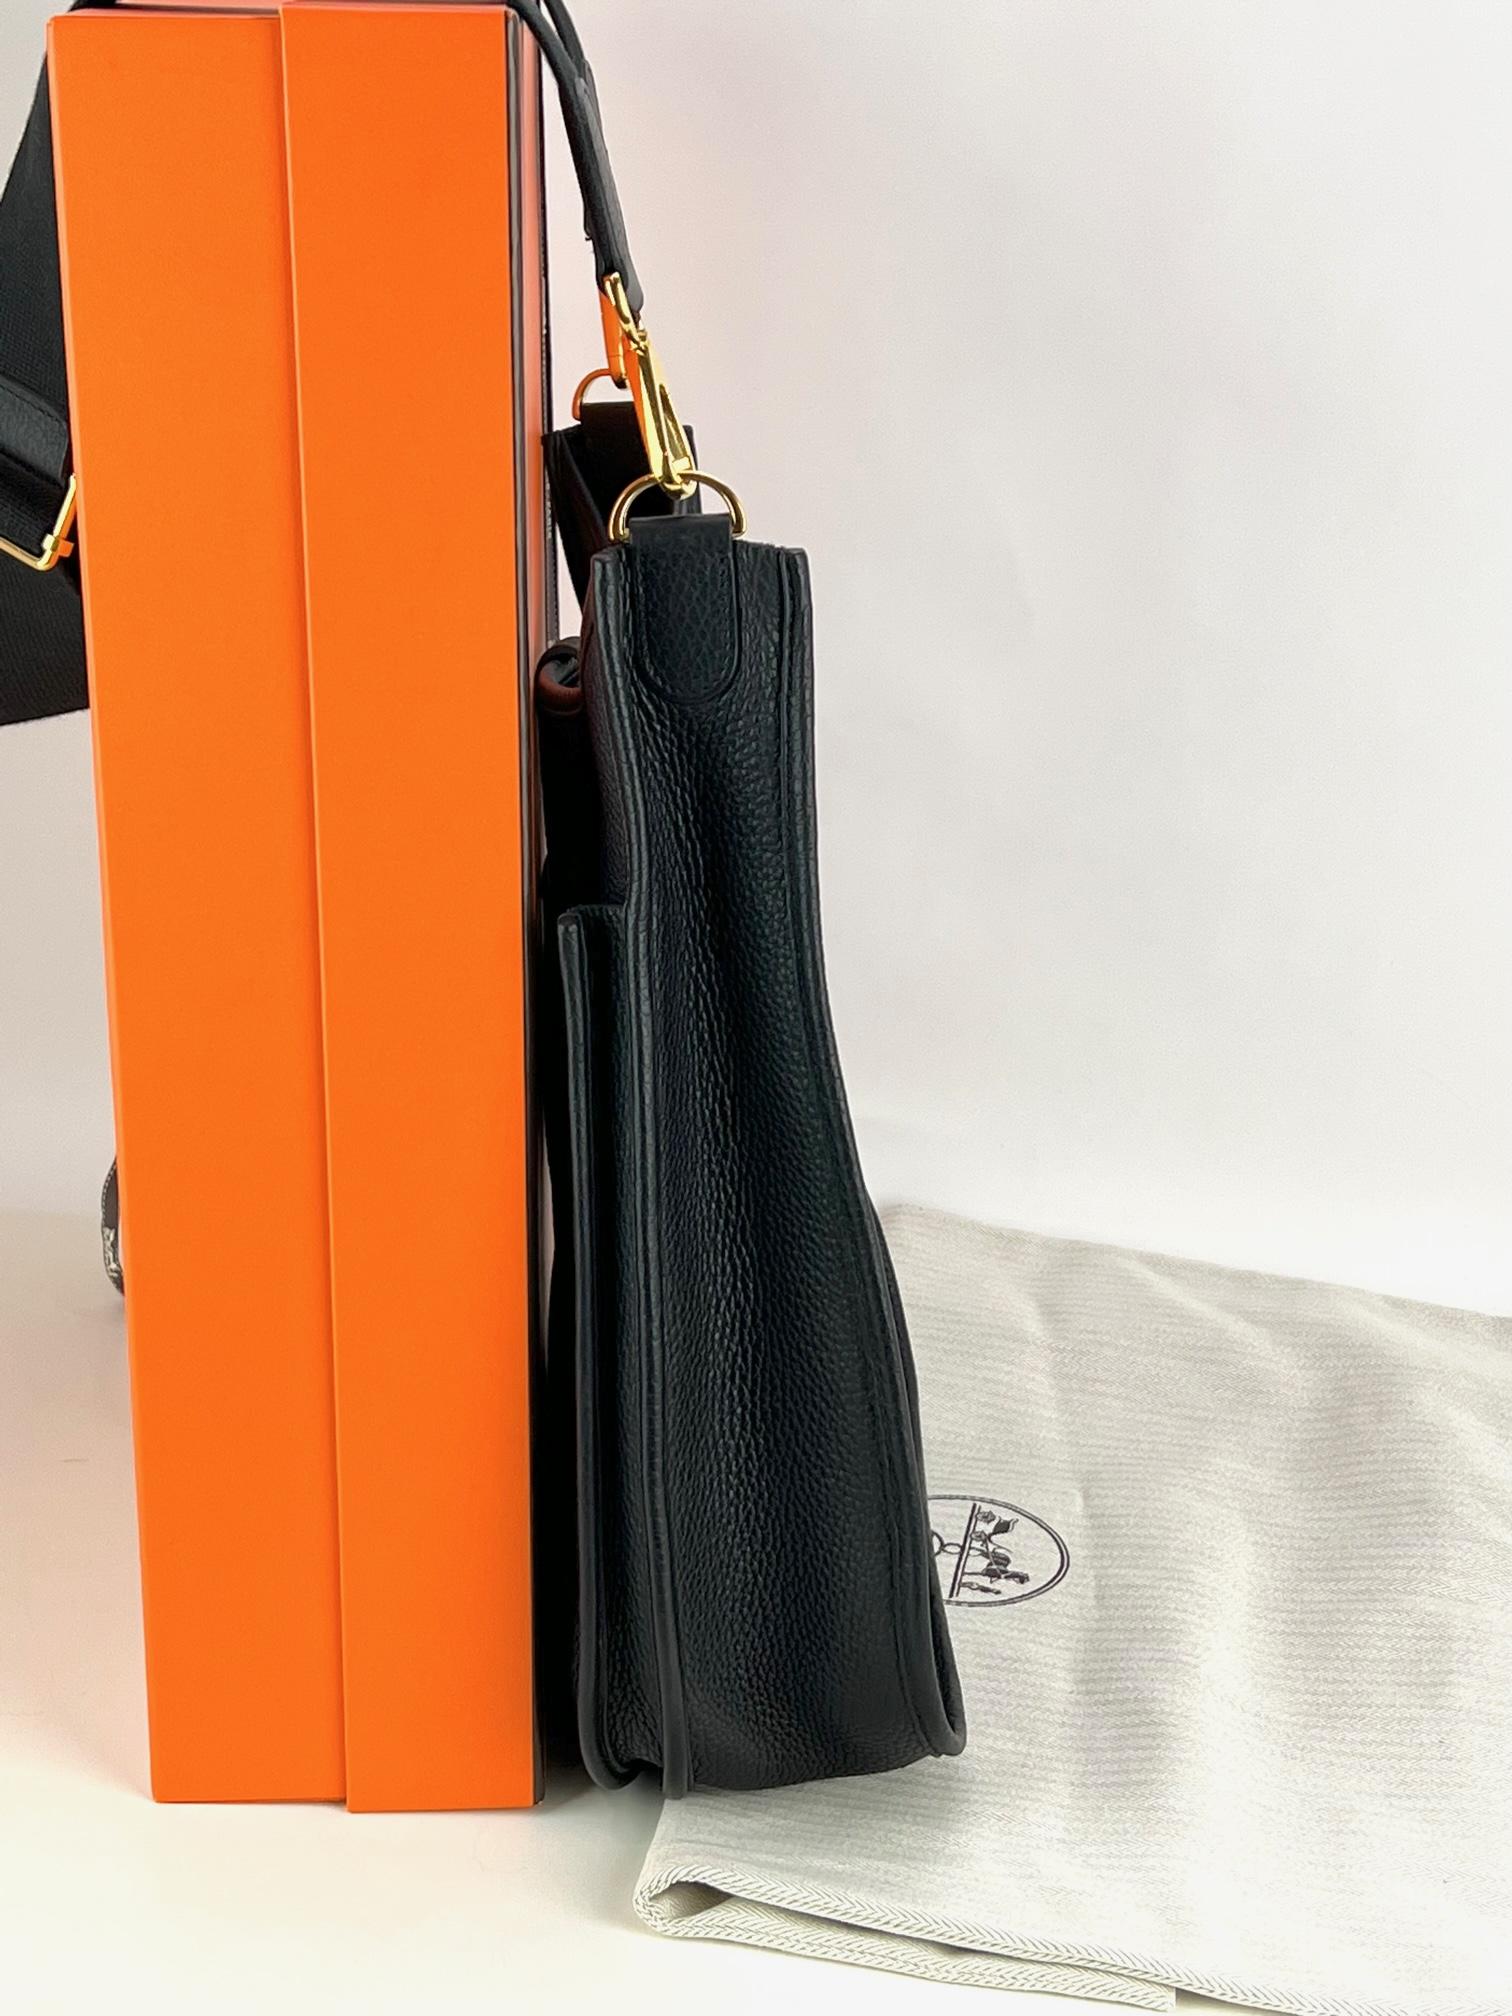 Pre-Owned  100% Authentic
Hermes Evelyne Bag Gen IIl Clemence GM Black
RATING: A/B...Very Good, well maintained, 
shows minor signs of wear
MATERIAL: caviar clemence leather
STRAP: Hermes removable , adjustable black canvas  
DROP: 20'' to 28''